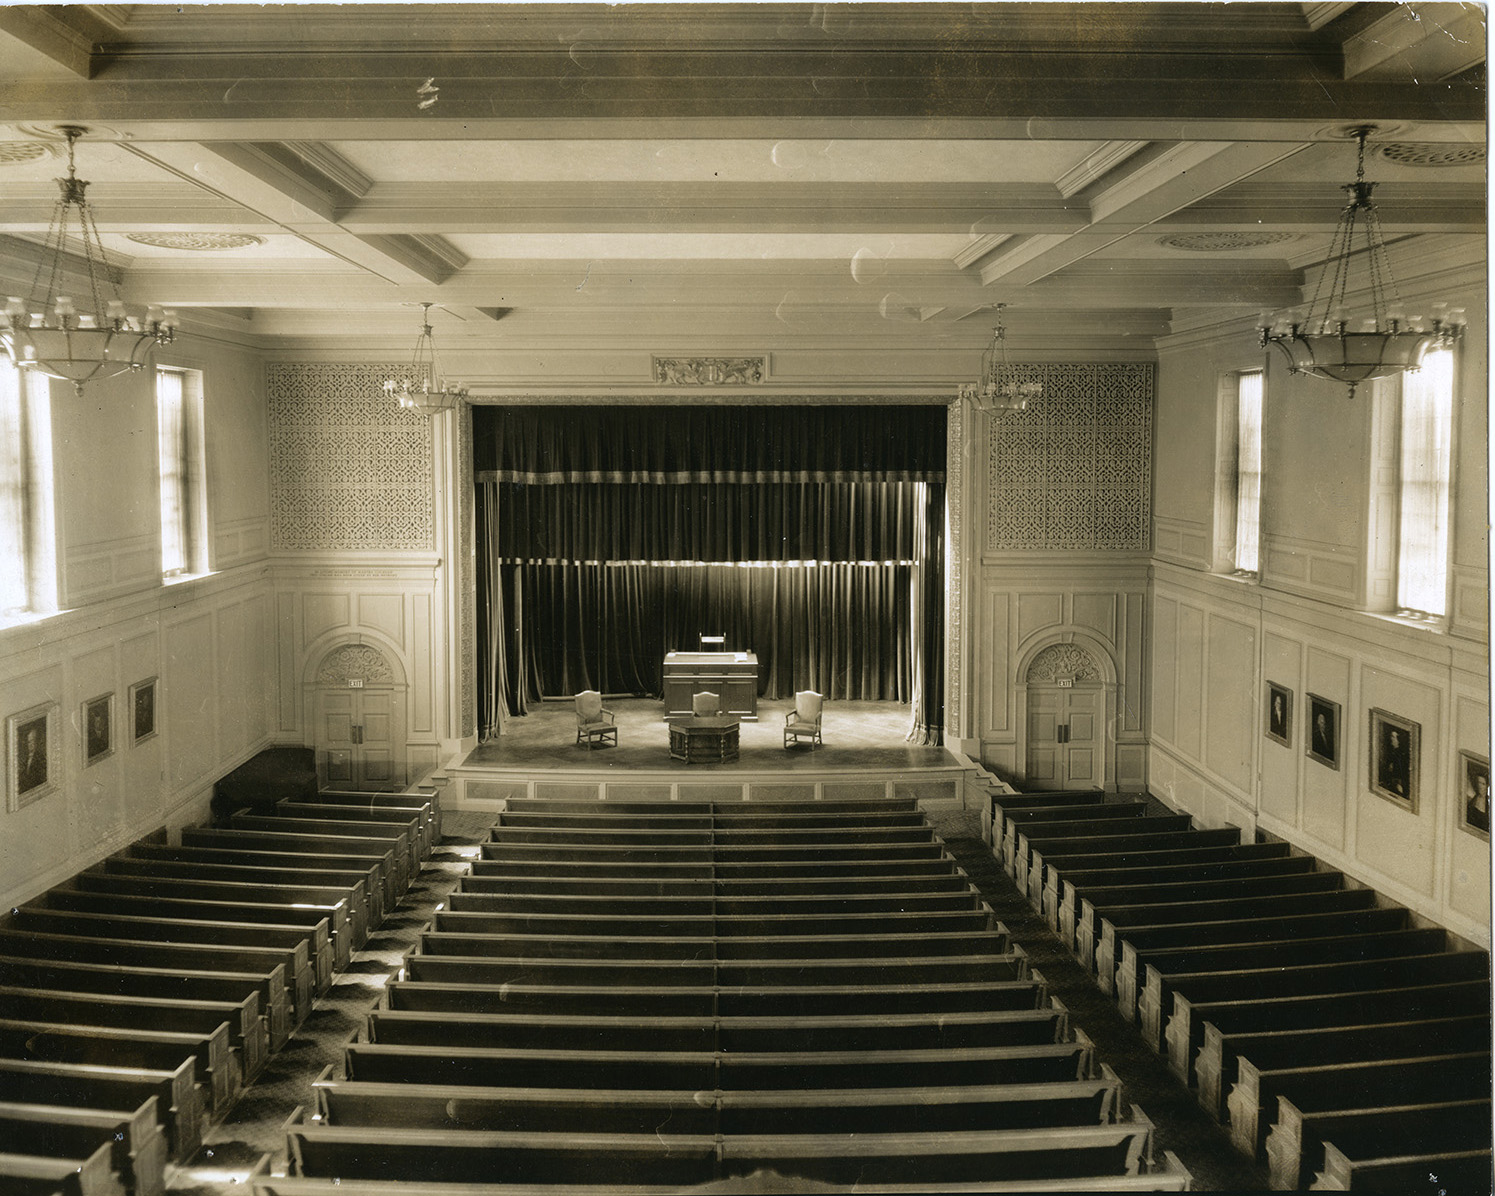 George Washington Hall interior, 1927. Photograph by Peter A. Juley and son.